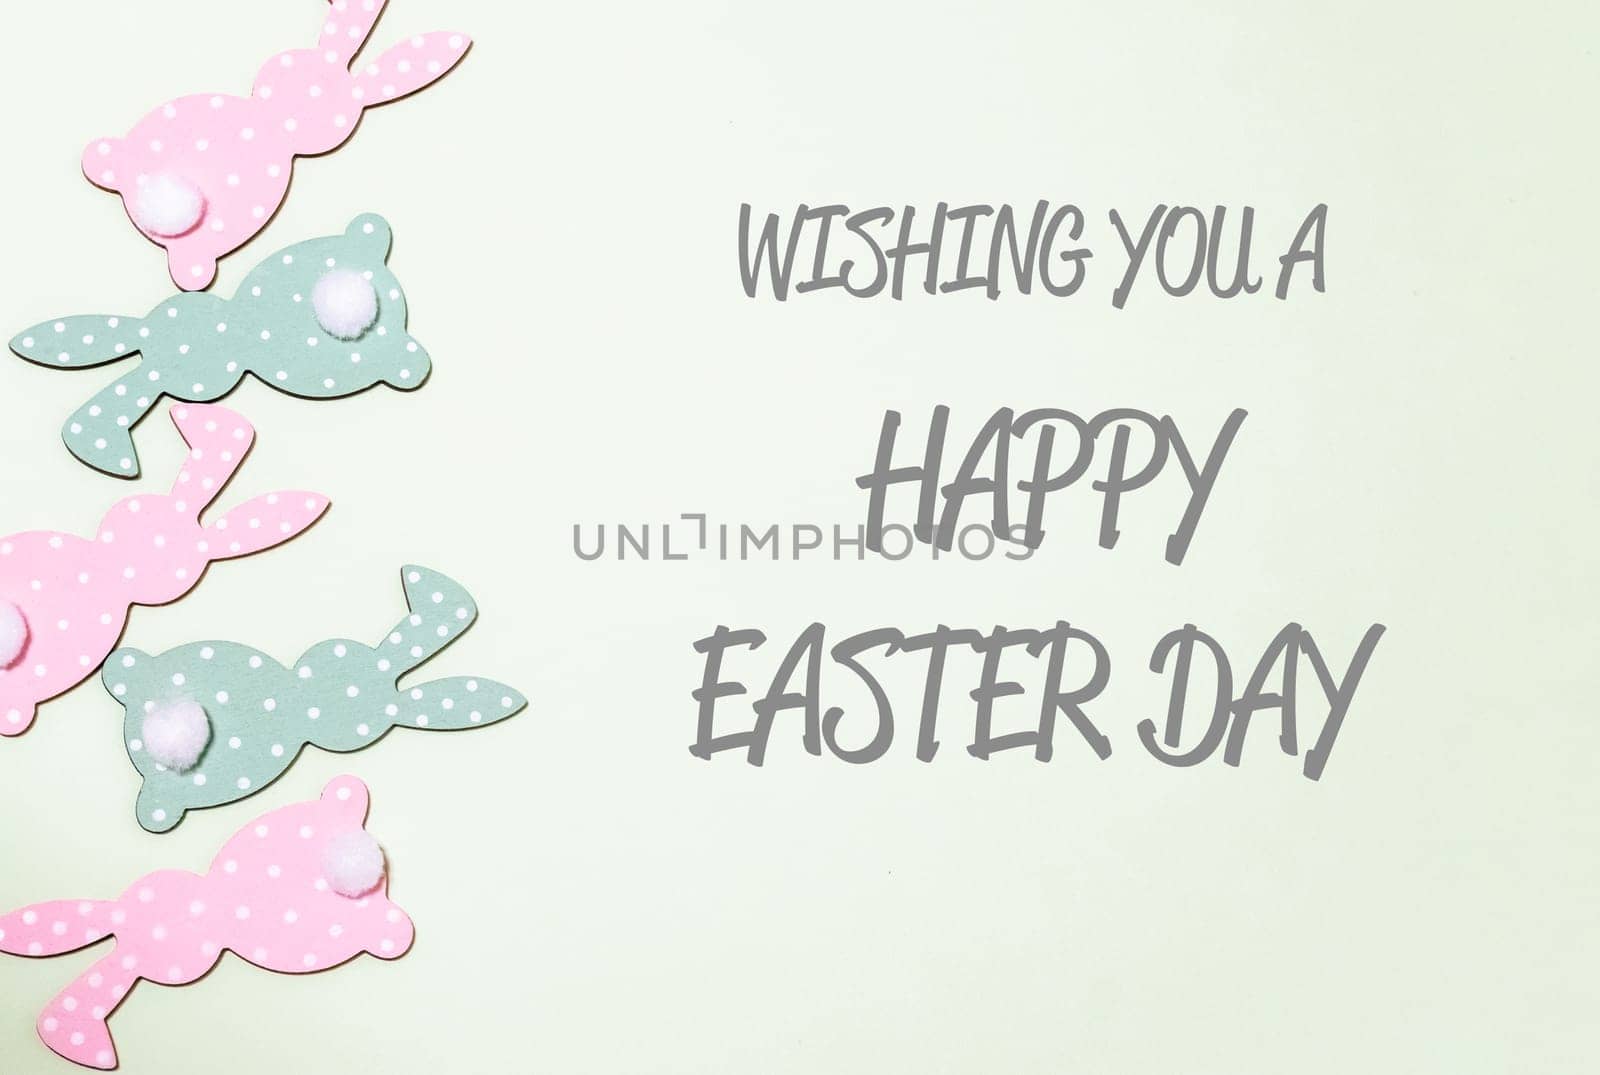 stylish text for easter holiday on paper background by Alla_Morozova93